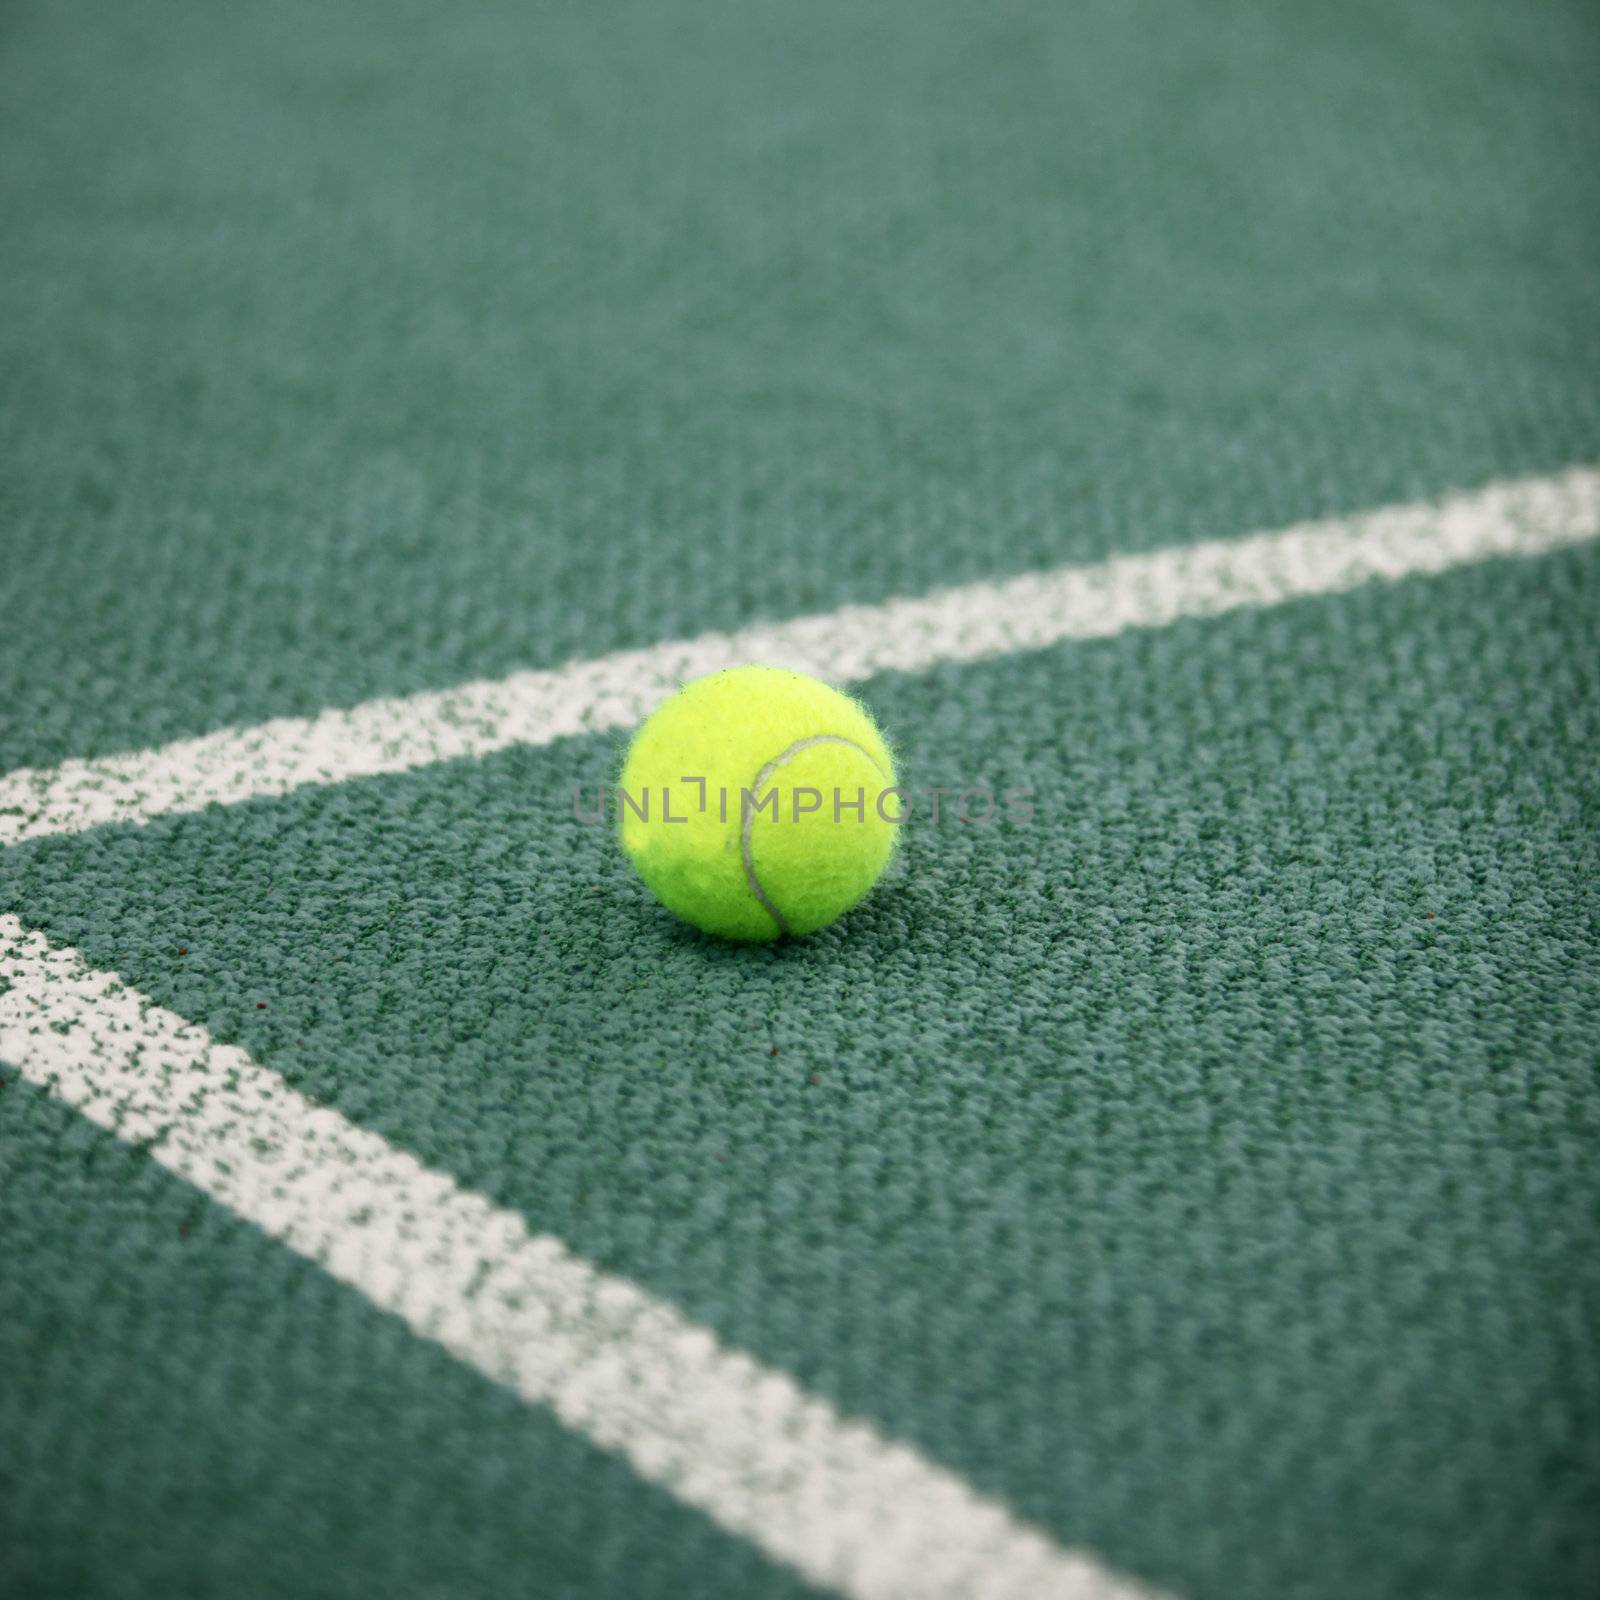 Luminous green high visibility tennis ball on a green tennis court lying in the angle of the lines forming the corner